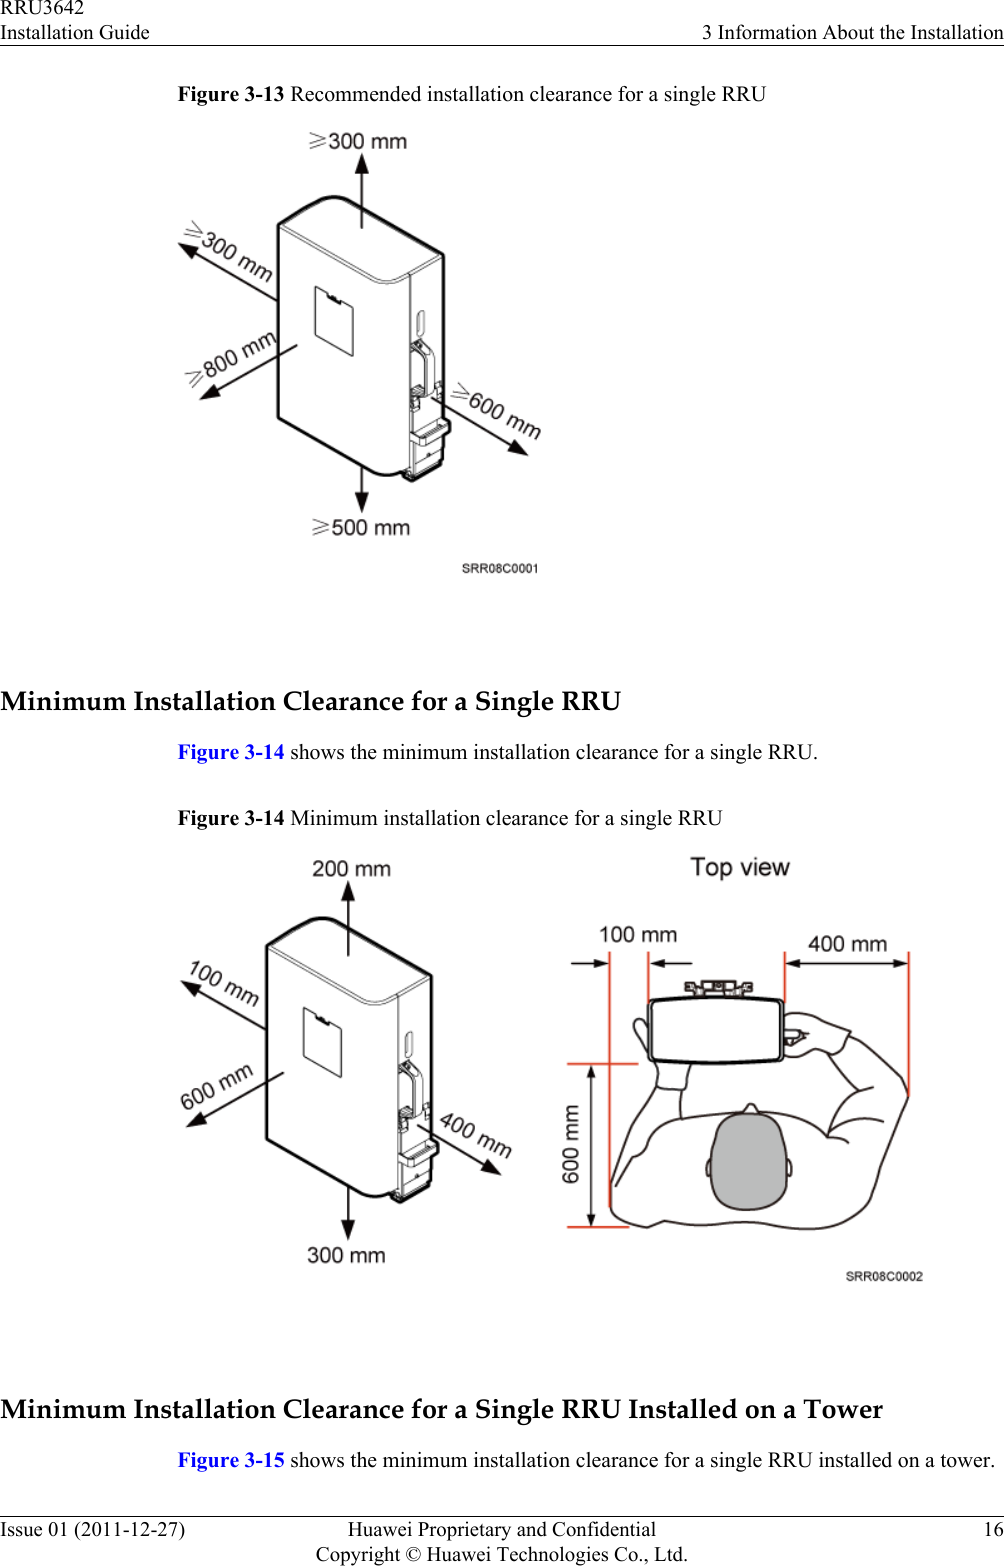 Figure 3-13 Recommended installation clearance for a single RRU Minimum Installation Clearance for a Single RRUFigure 3-14 shows the minimum installation clearance for a single RRU.Figure 3-14 Minimum installation clearance for a single RRU Minimum Installation Clearance for a Single RRU Installed on a TowerFigure 3-15 shows the minimum installation clearance for a single RRU installed on a tower.RRU3642Installation Guide 3 Information About the InstallationIssue 01 (2011-12-27) Huawei Proprietary and ConfidentialCopyright © Huawei Technologies Co., Ltd.16